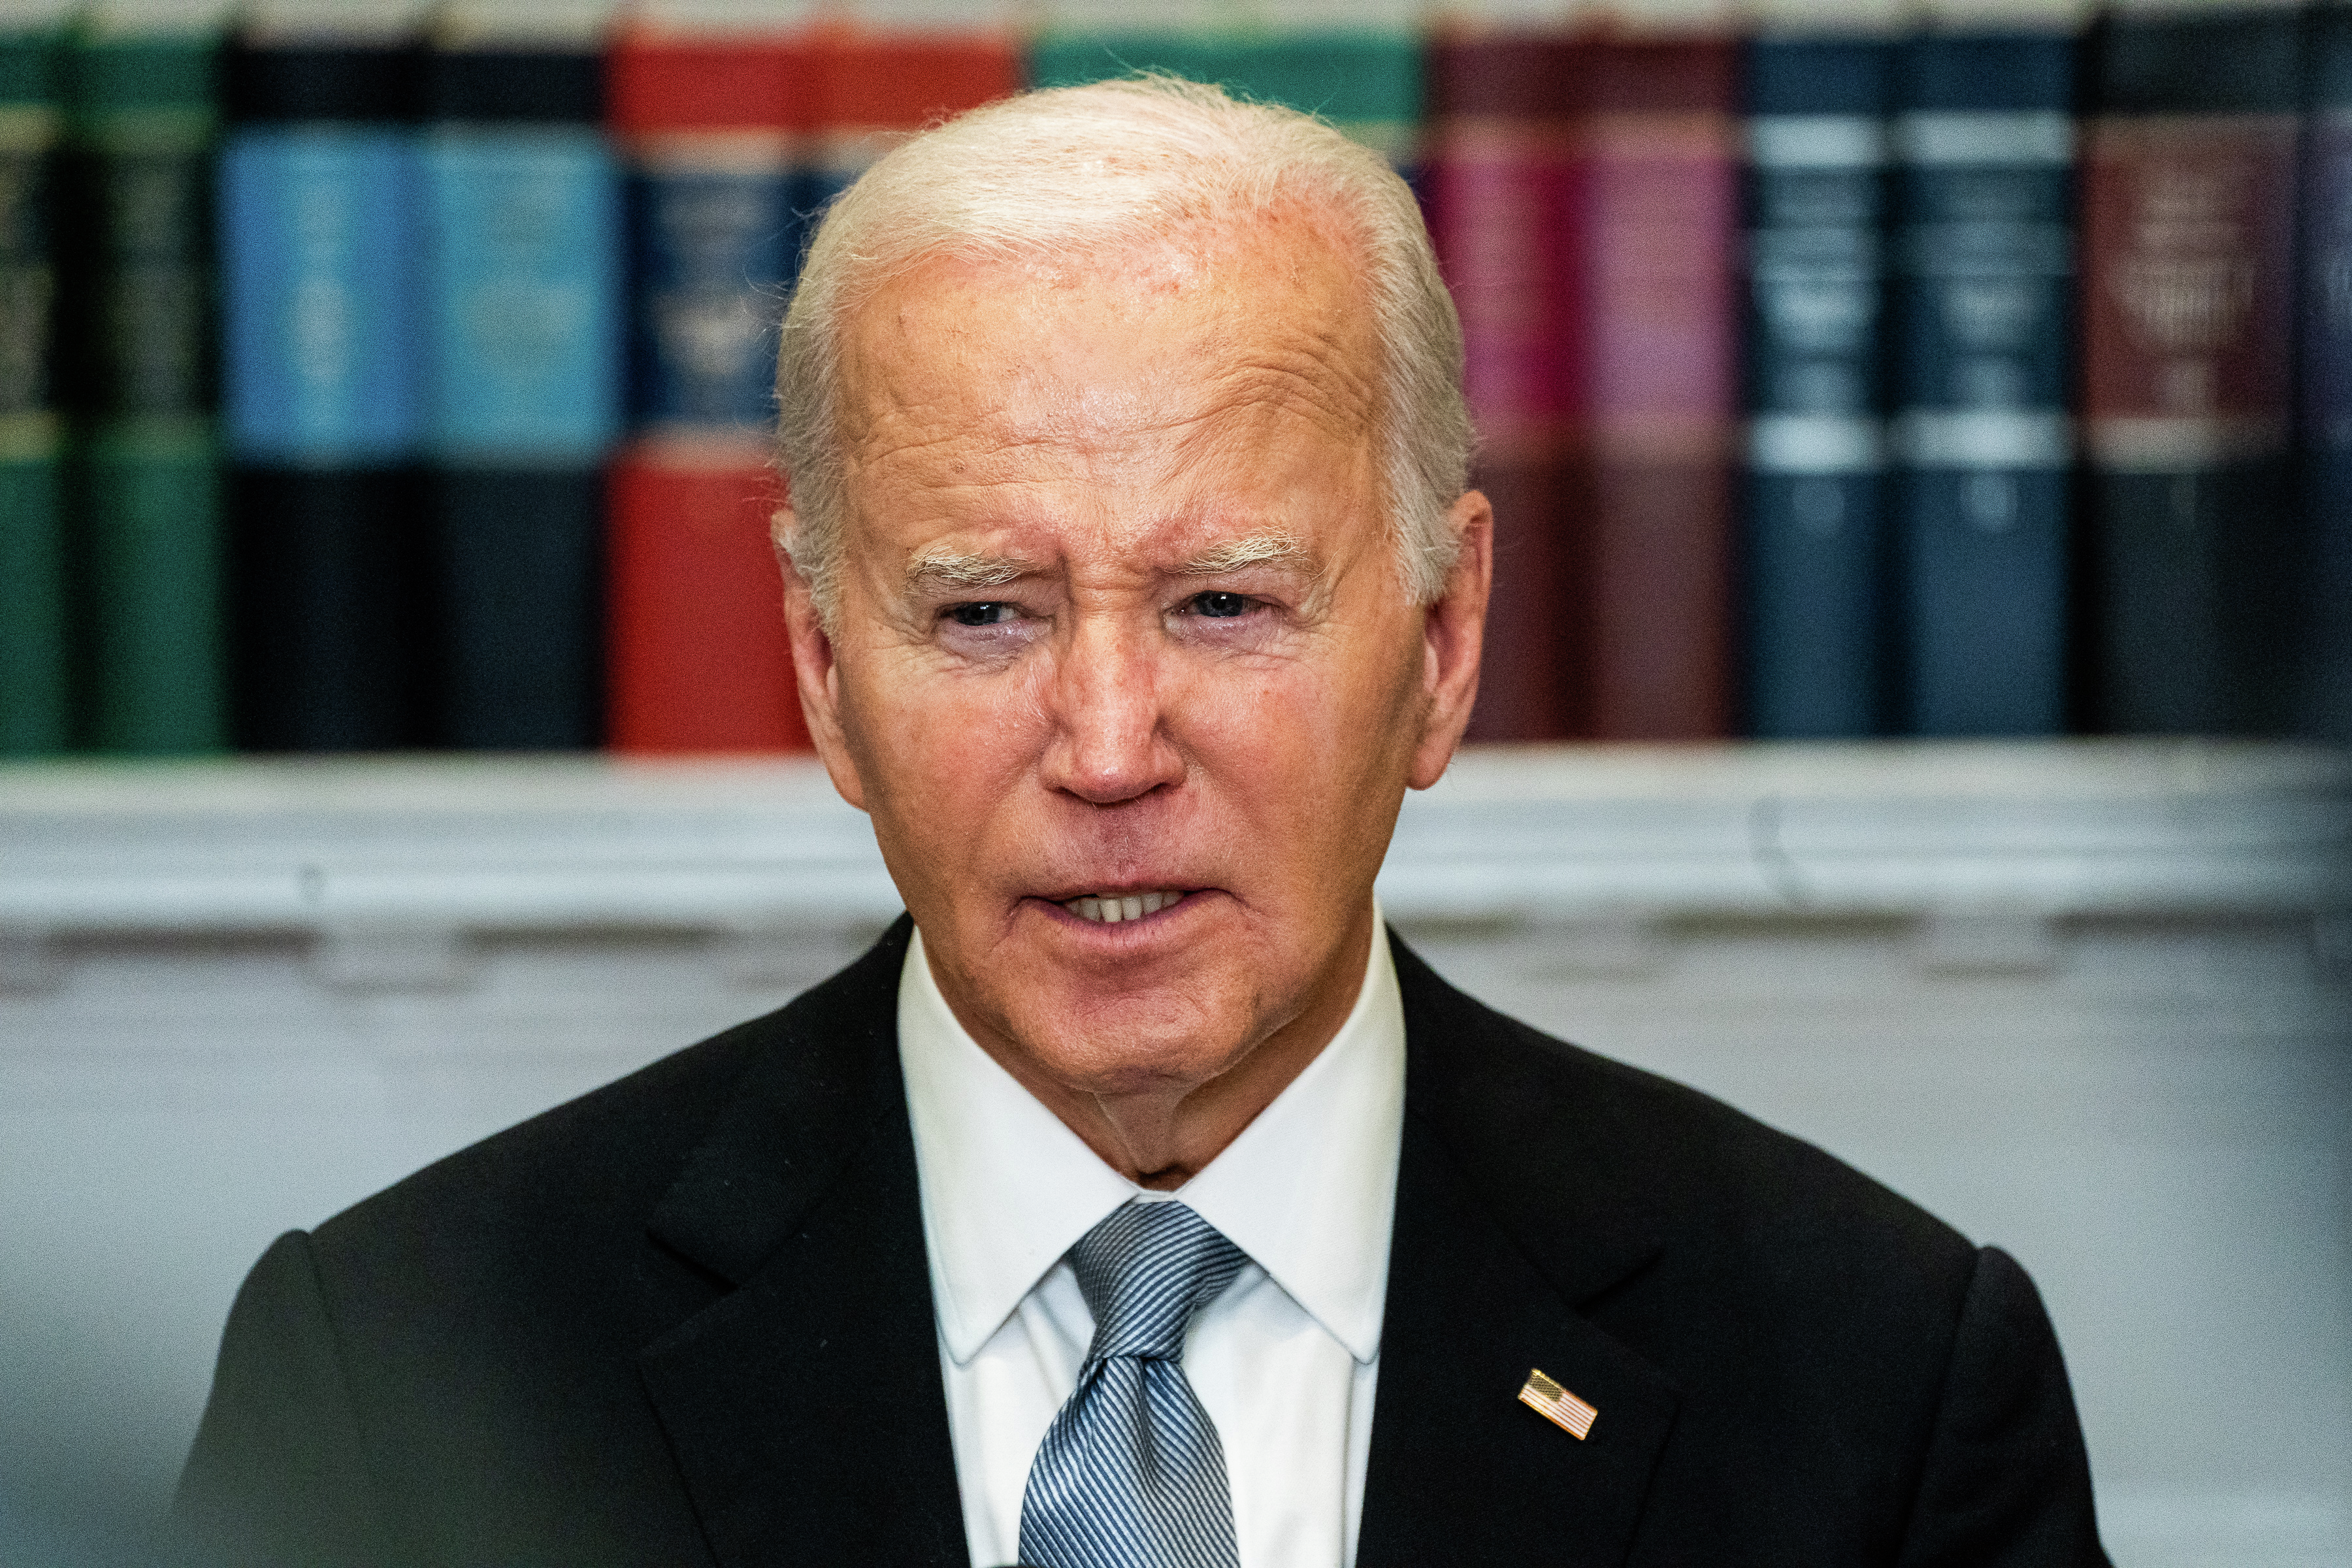 Reaction from President Biden's decision to exit presidential race